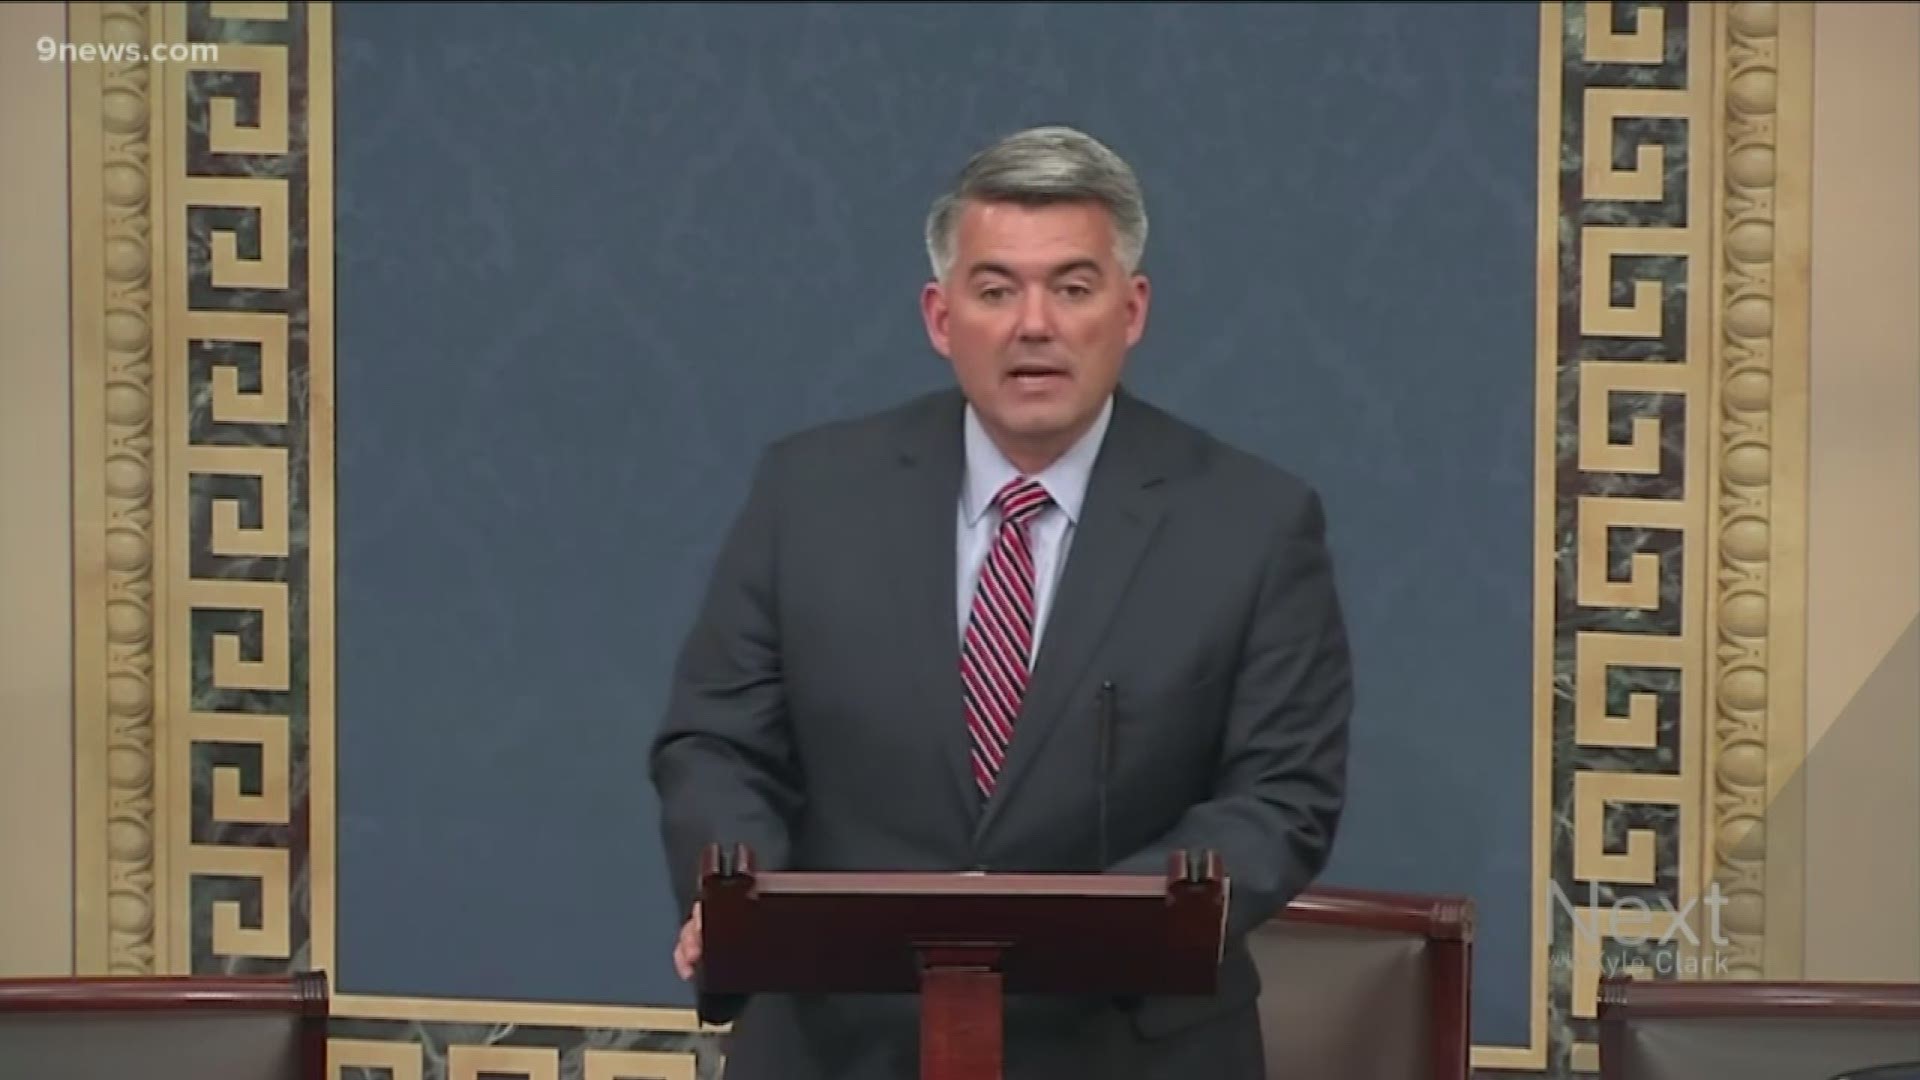 Some GOP senators criticized the Trump administration's briefing on Iran and Soleimani's death. Colorado Sen. Cory Gardner is not one of them.